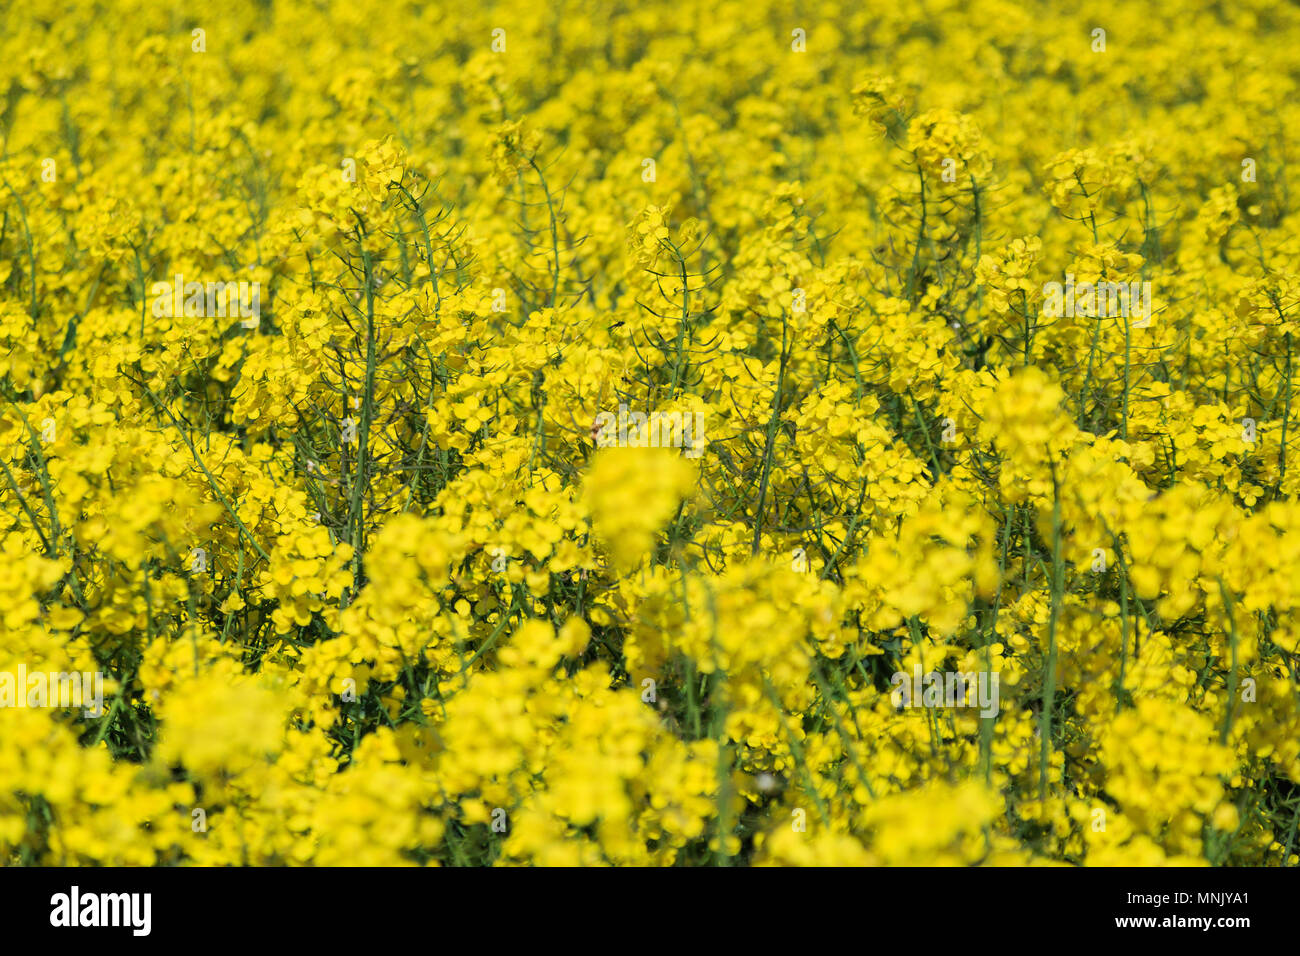 England, North Yorkshire, Rievaulx. Near River Rye. Fields of bright yellow Brassica Napus. Brassicaceae. Common name: Canola or Rapeseed.  Used for o Stock Photo